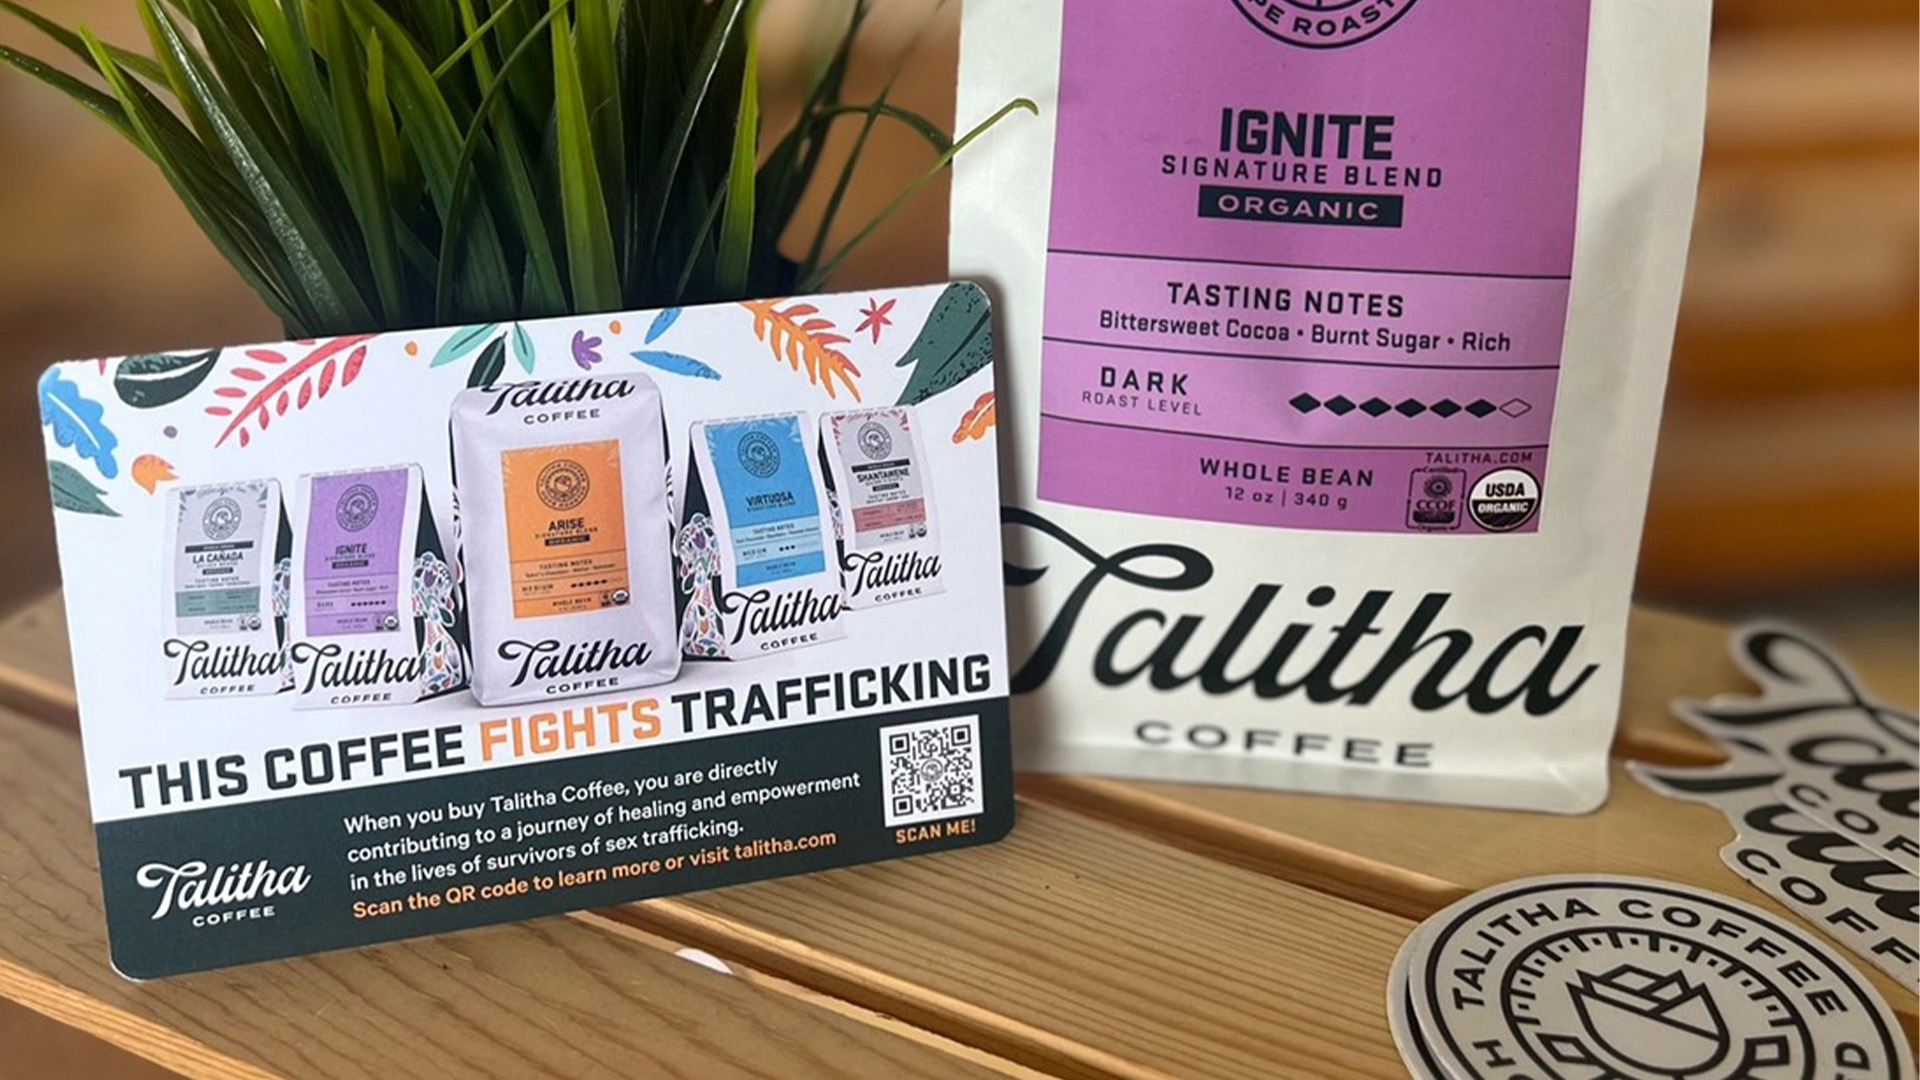 Talitha Coffee is a San Diego-based company that hires and provides holistic support for survivors of sex trafficking.